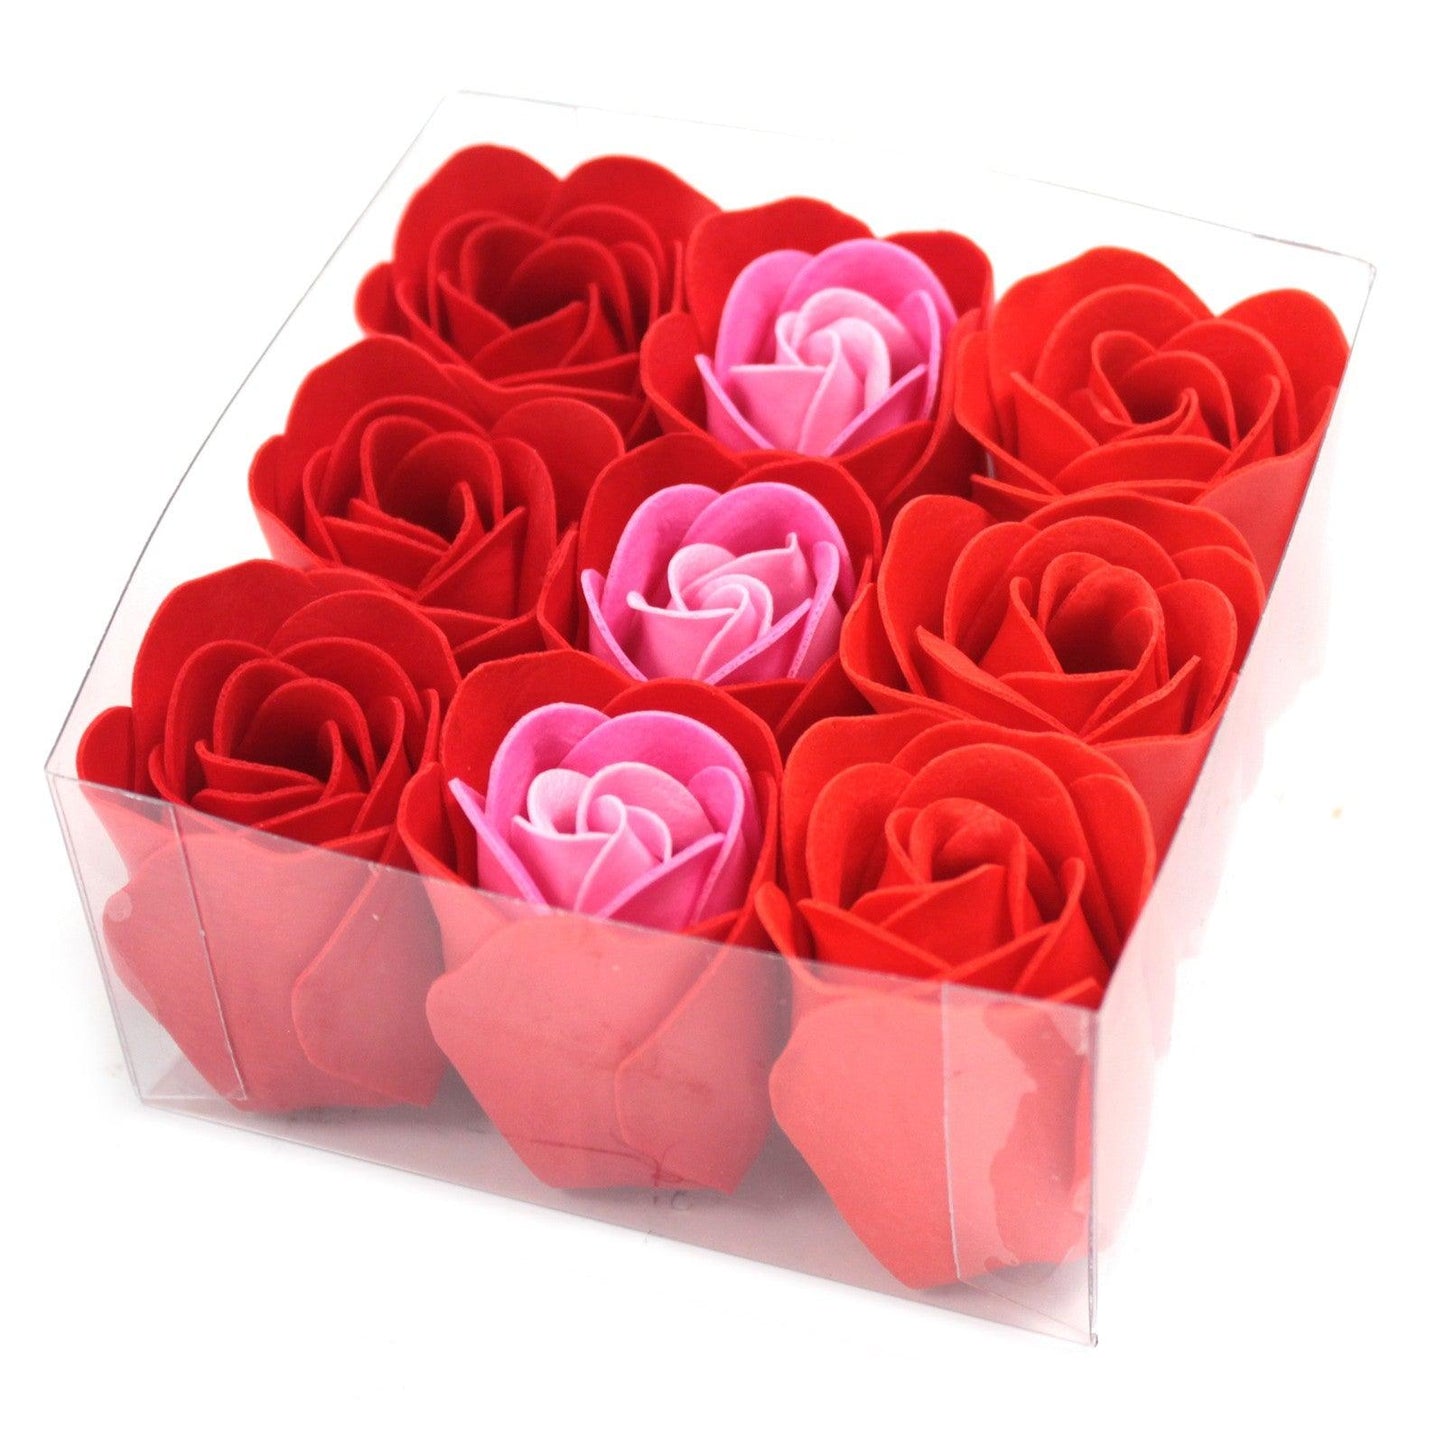 Set of 9 Soap Flowers - Red Roses - DuvetDay.co.uk